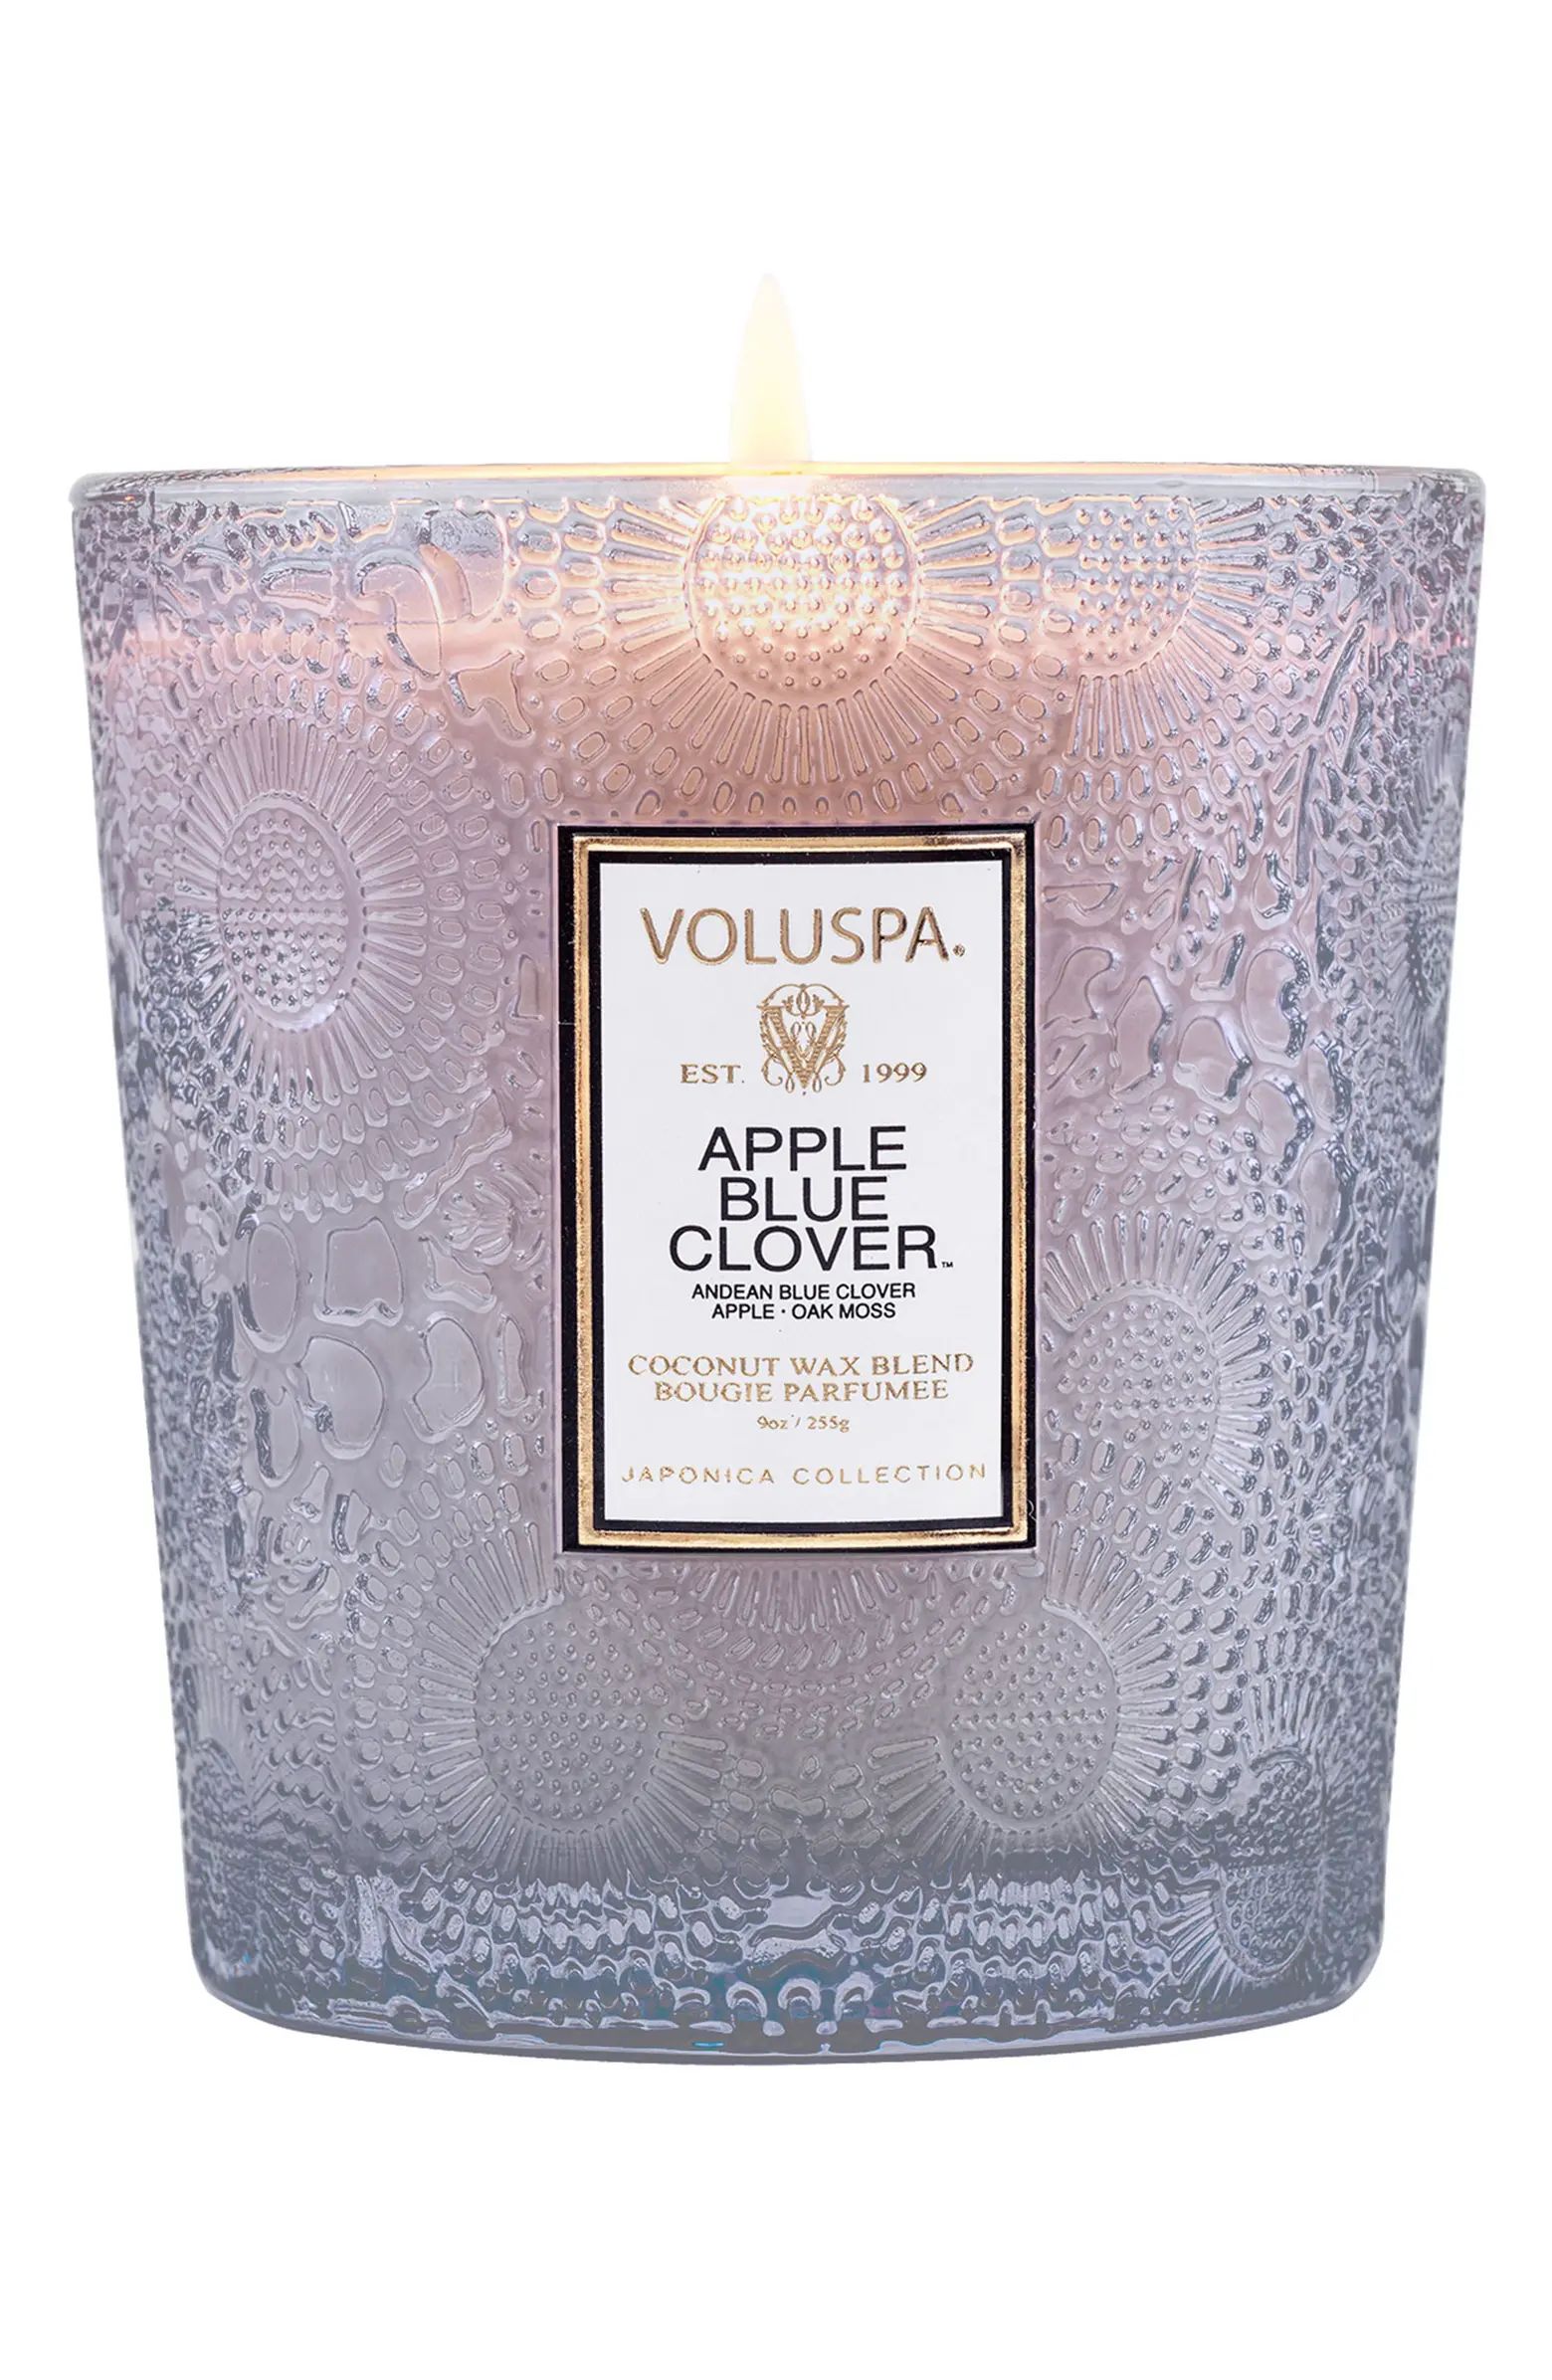 Apple Blue Clover Classic Embossed Glass Candle | Nordstrom